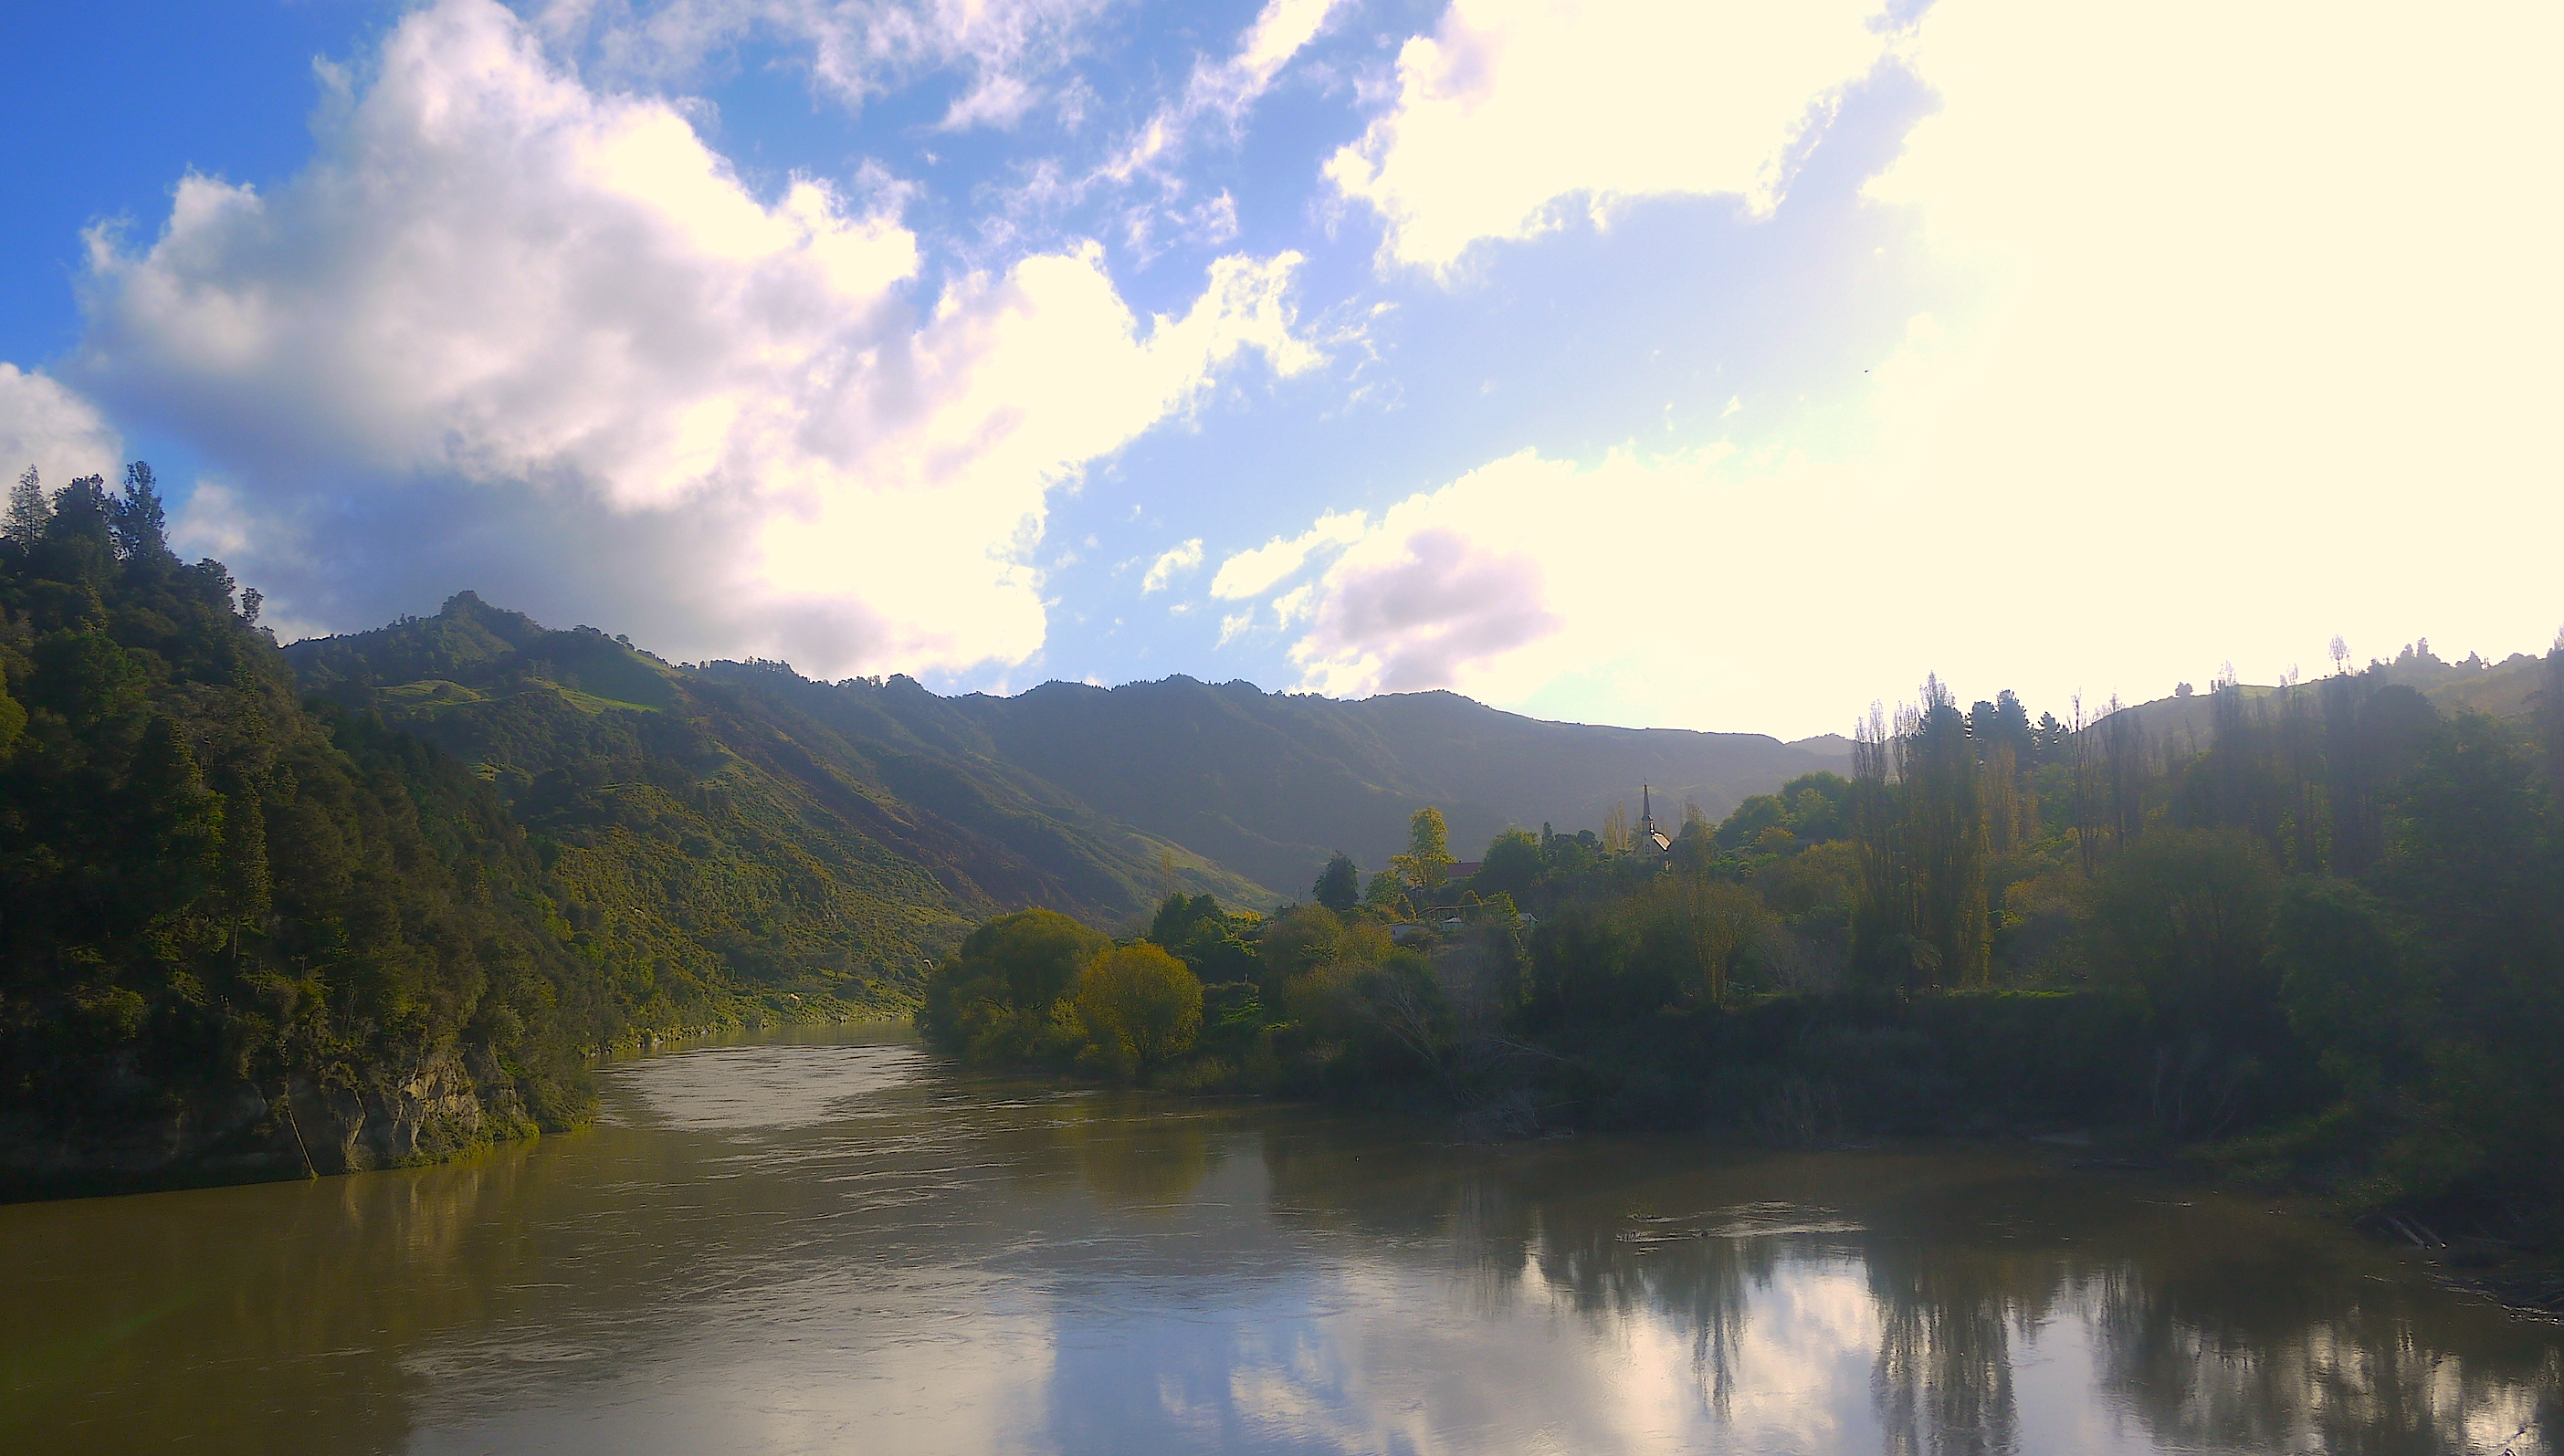 The Church at Jerusalem, on the bend of the Whanganui River